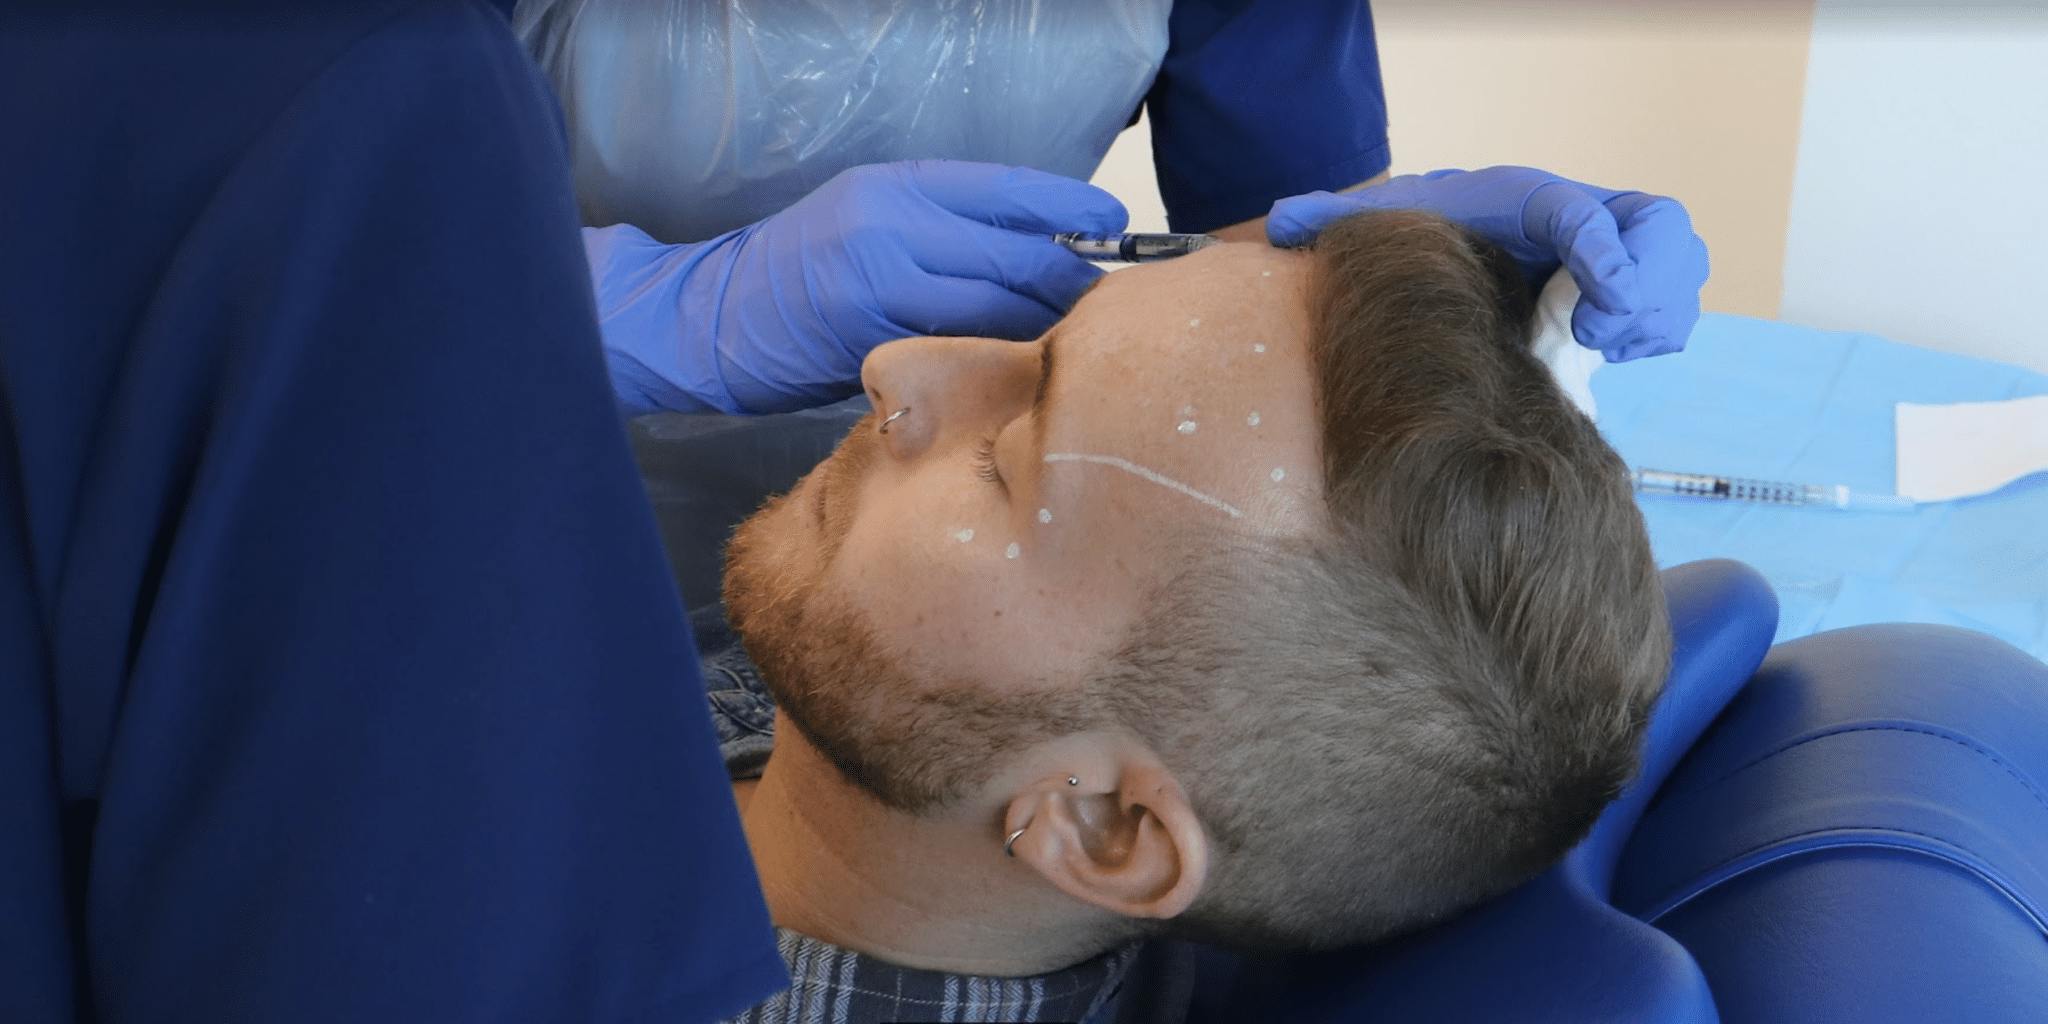 Administering Botox to Male Patients